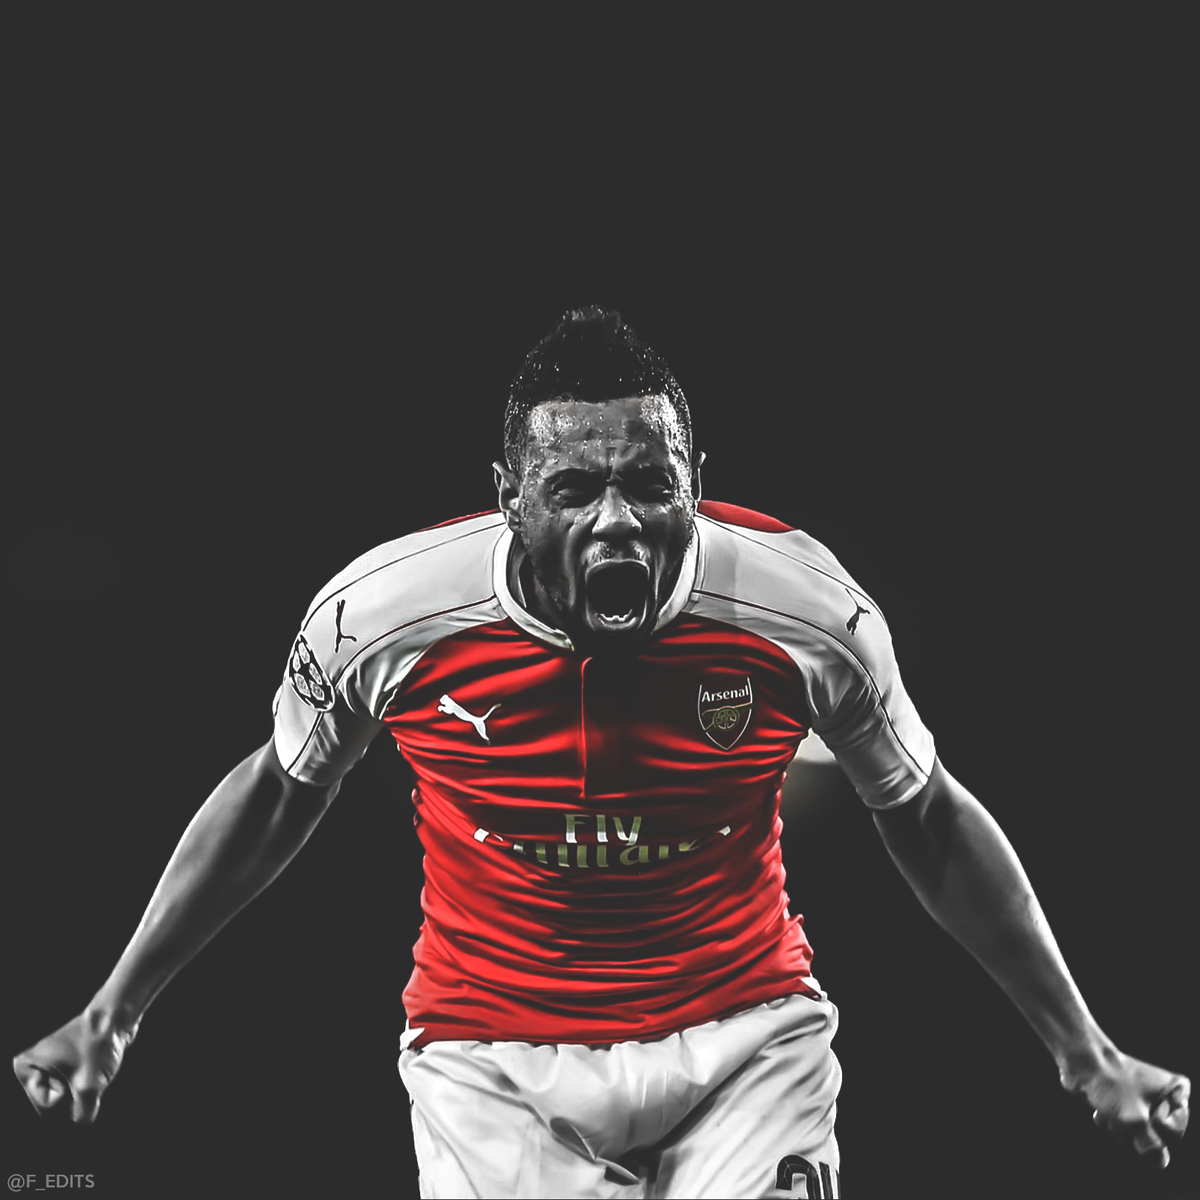 Fredrik On Passion Francis Coquelin Afc Coyg iPhone